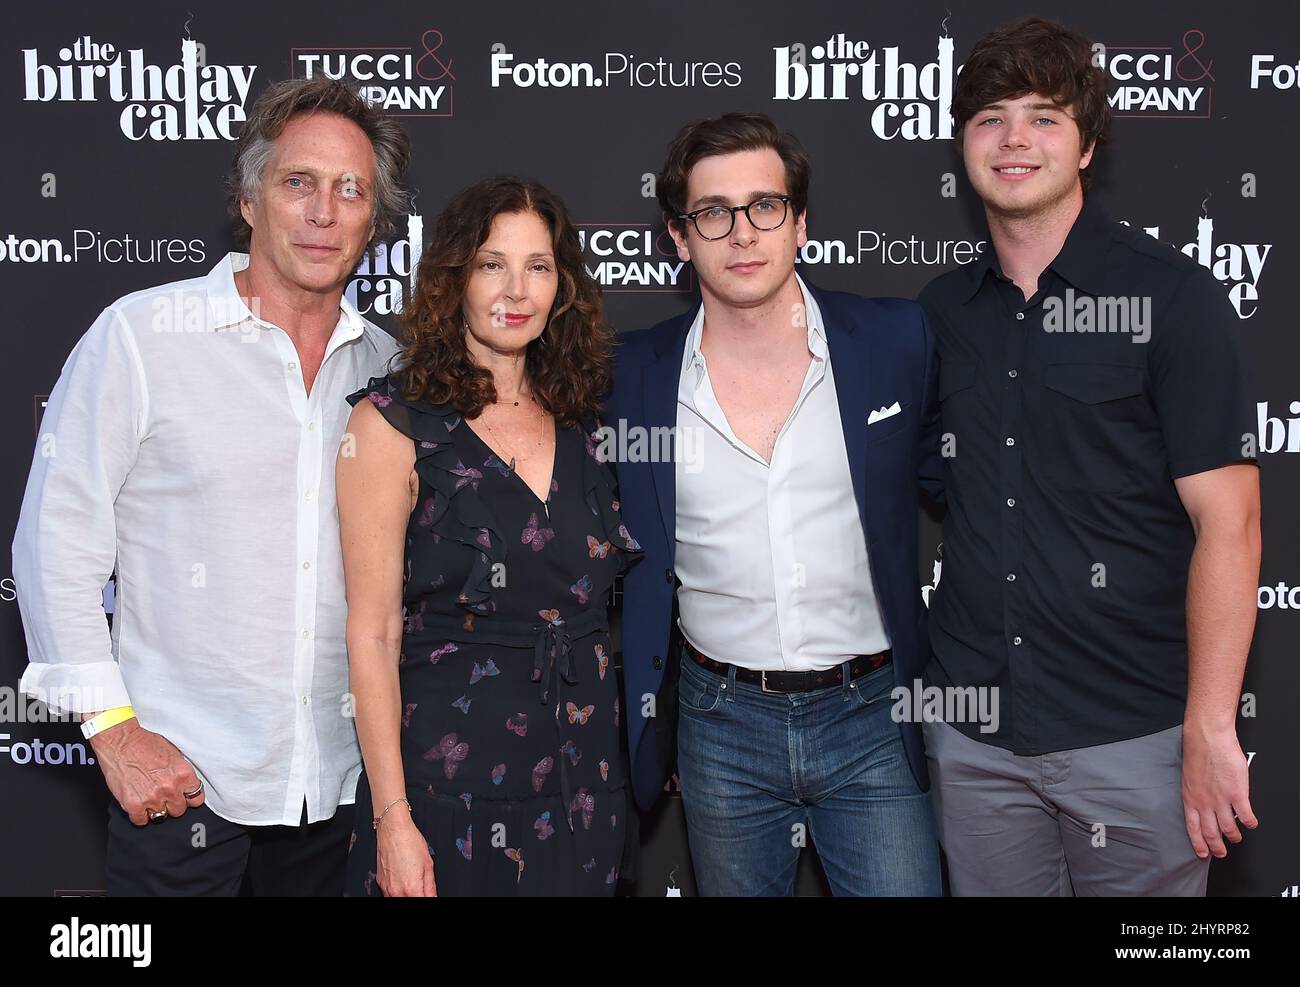 William Fichtner, Kymberly Kalil, Sam Fichtner and Van Fitchner arriving to €'The Birthday Cake' Los Angeles Premiere at Fine Arts Theatre on June 16, 2021 in Los Angeles, CA. Stock Photo